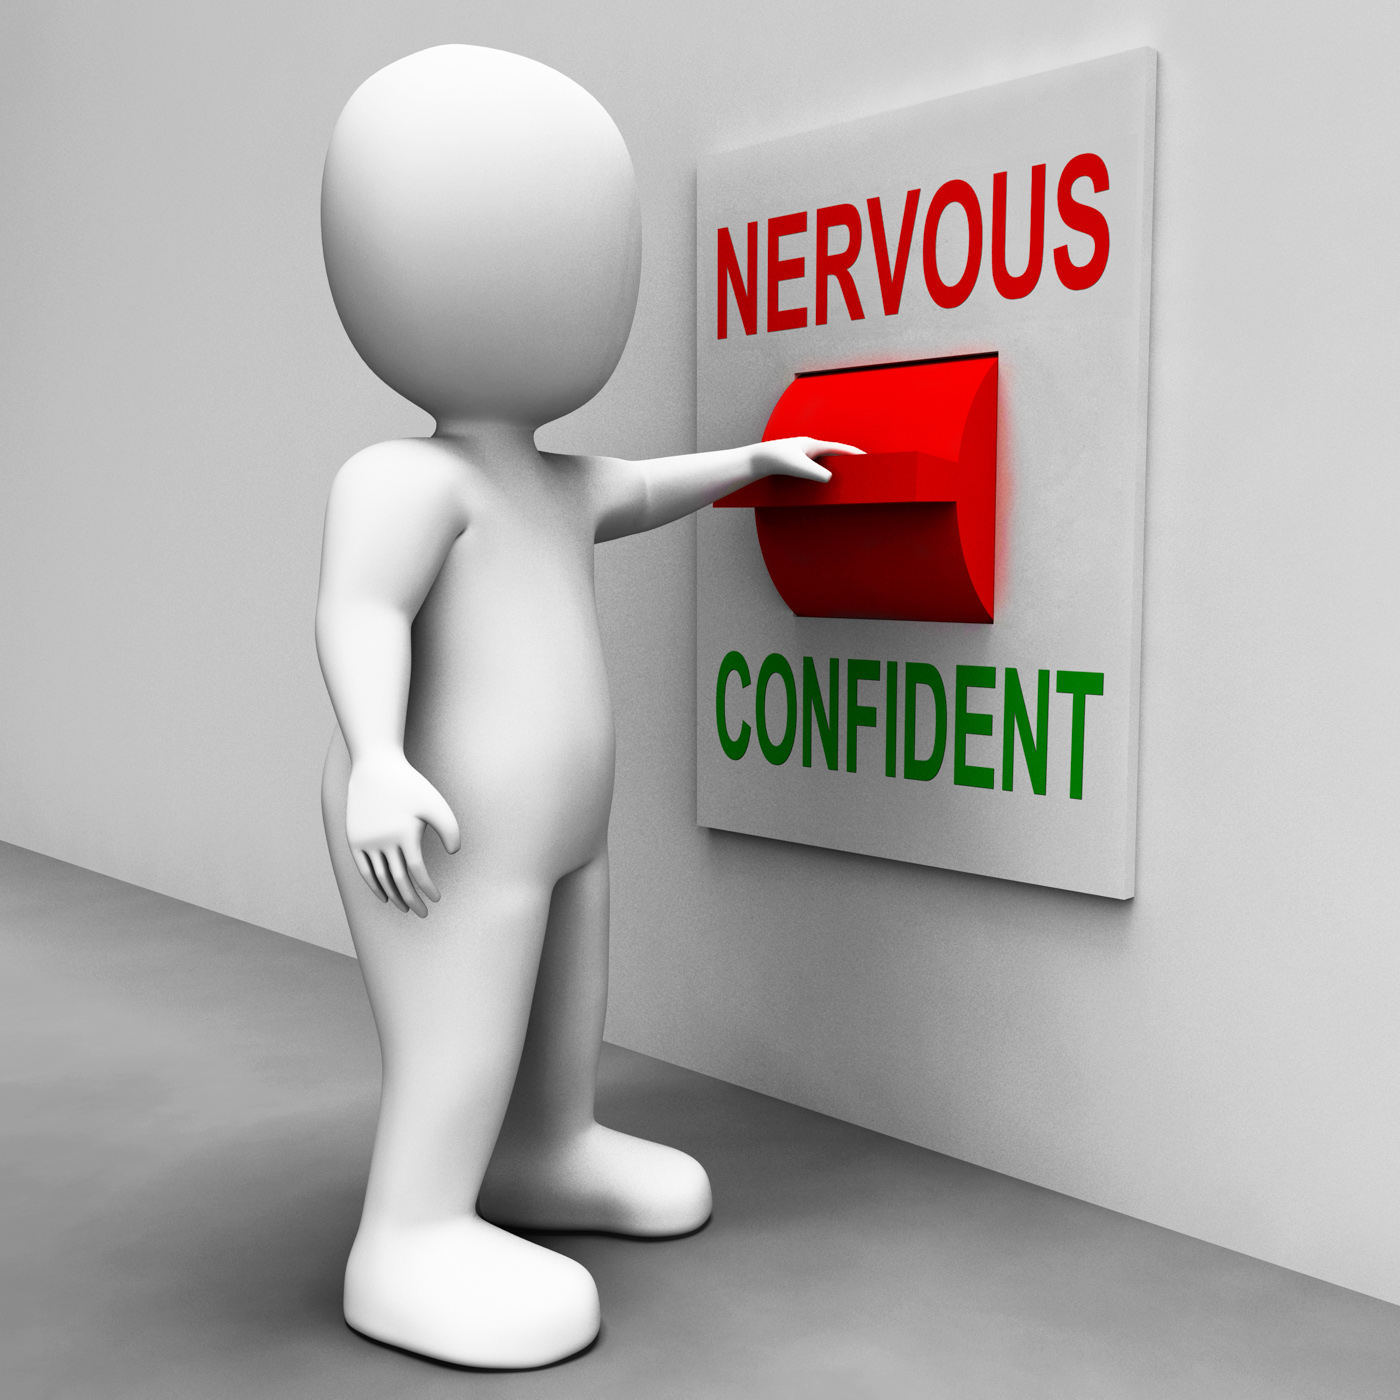 Nervous confident switch shows nerves or confidence photo